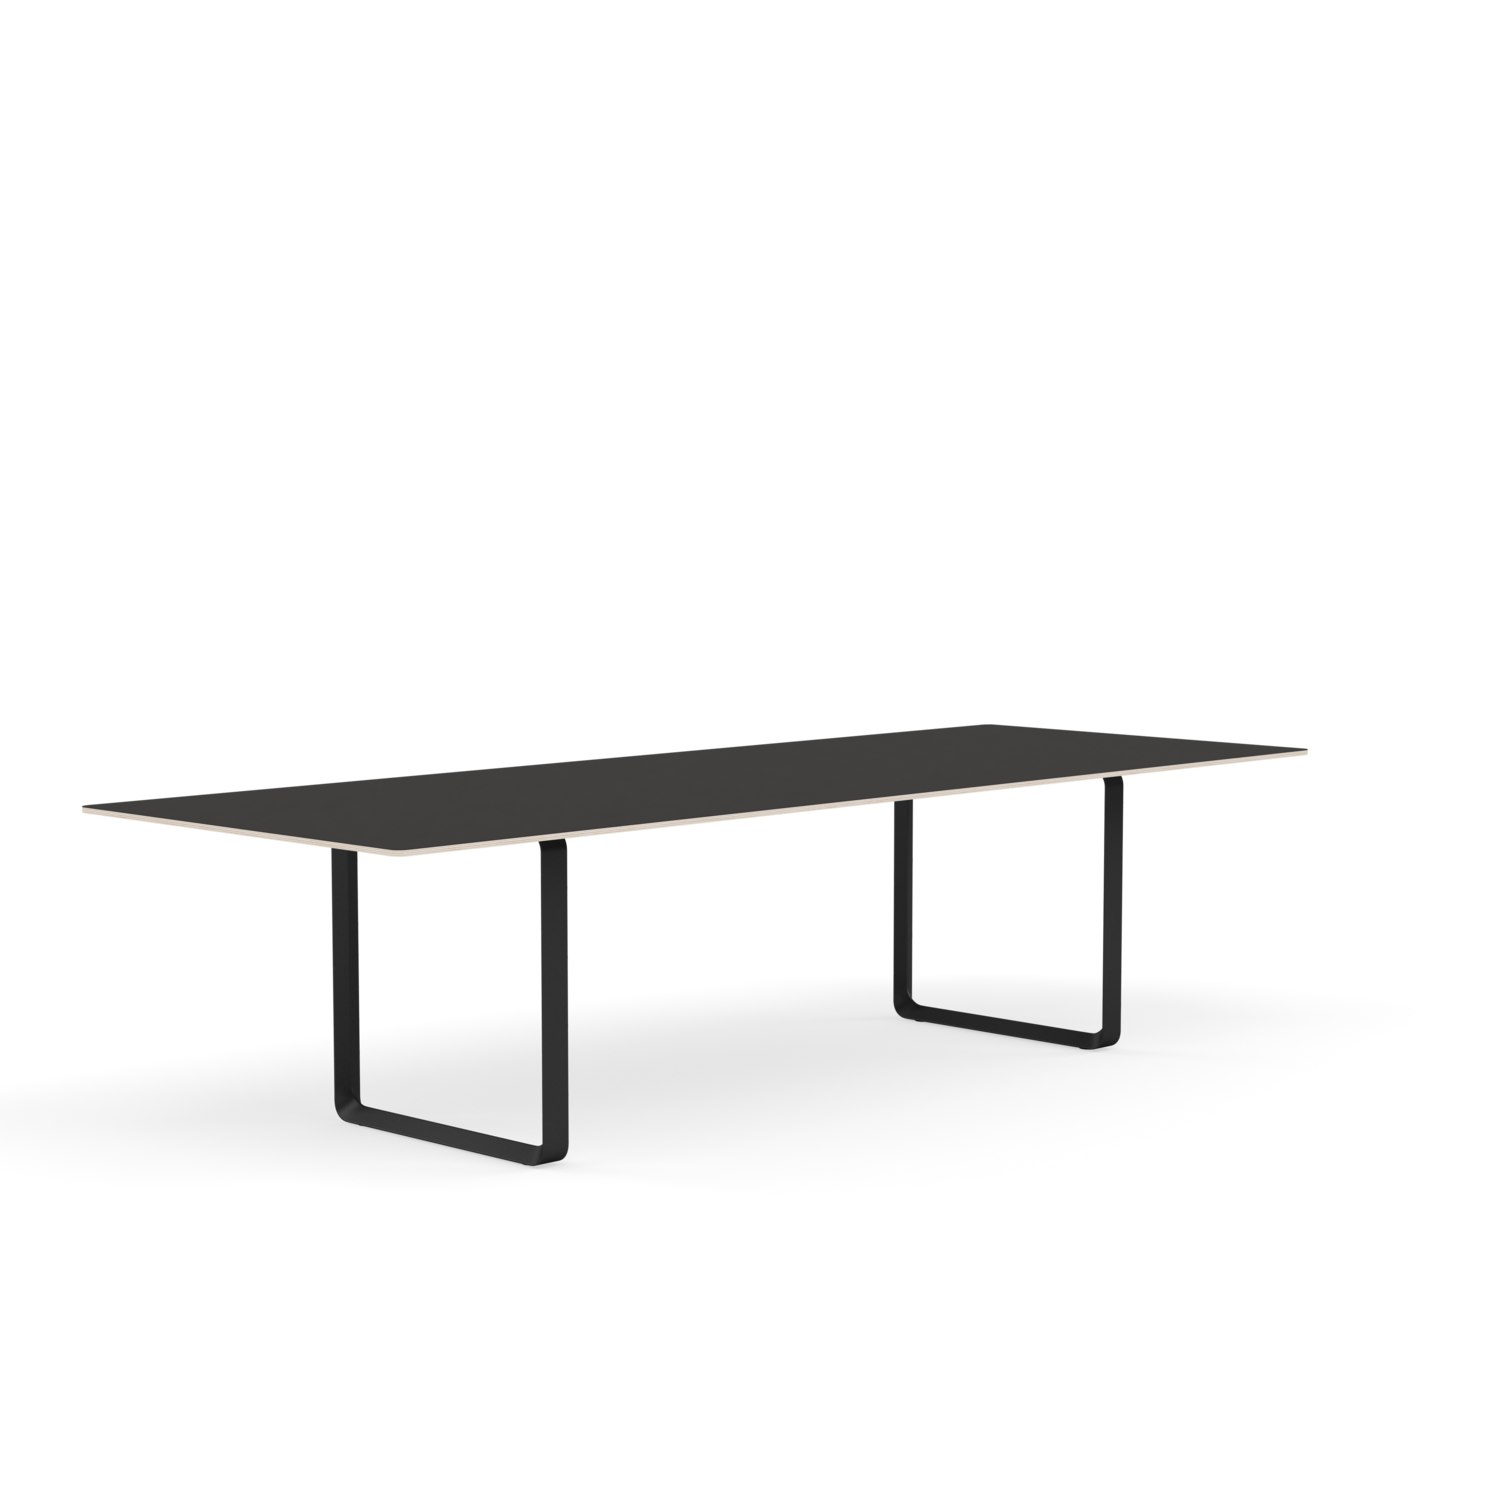 70/70 Table | A contemporary table for any space